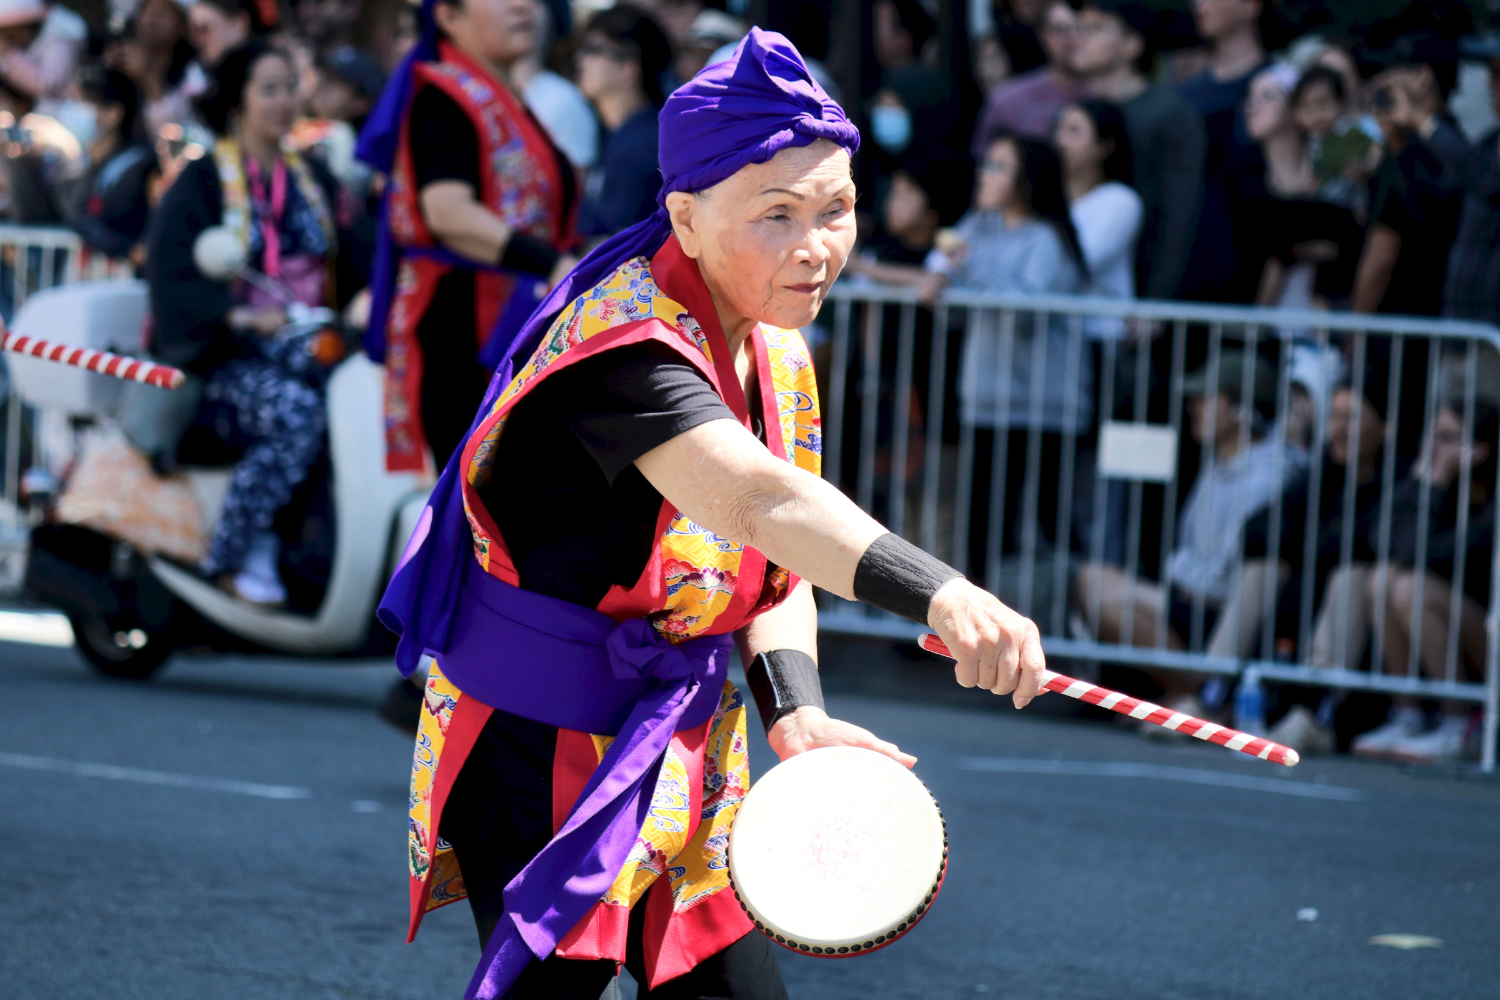 Experience the cultural traditions with local festivals on Stick Figure Tour 2025 USA